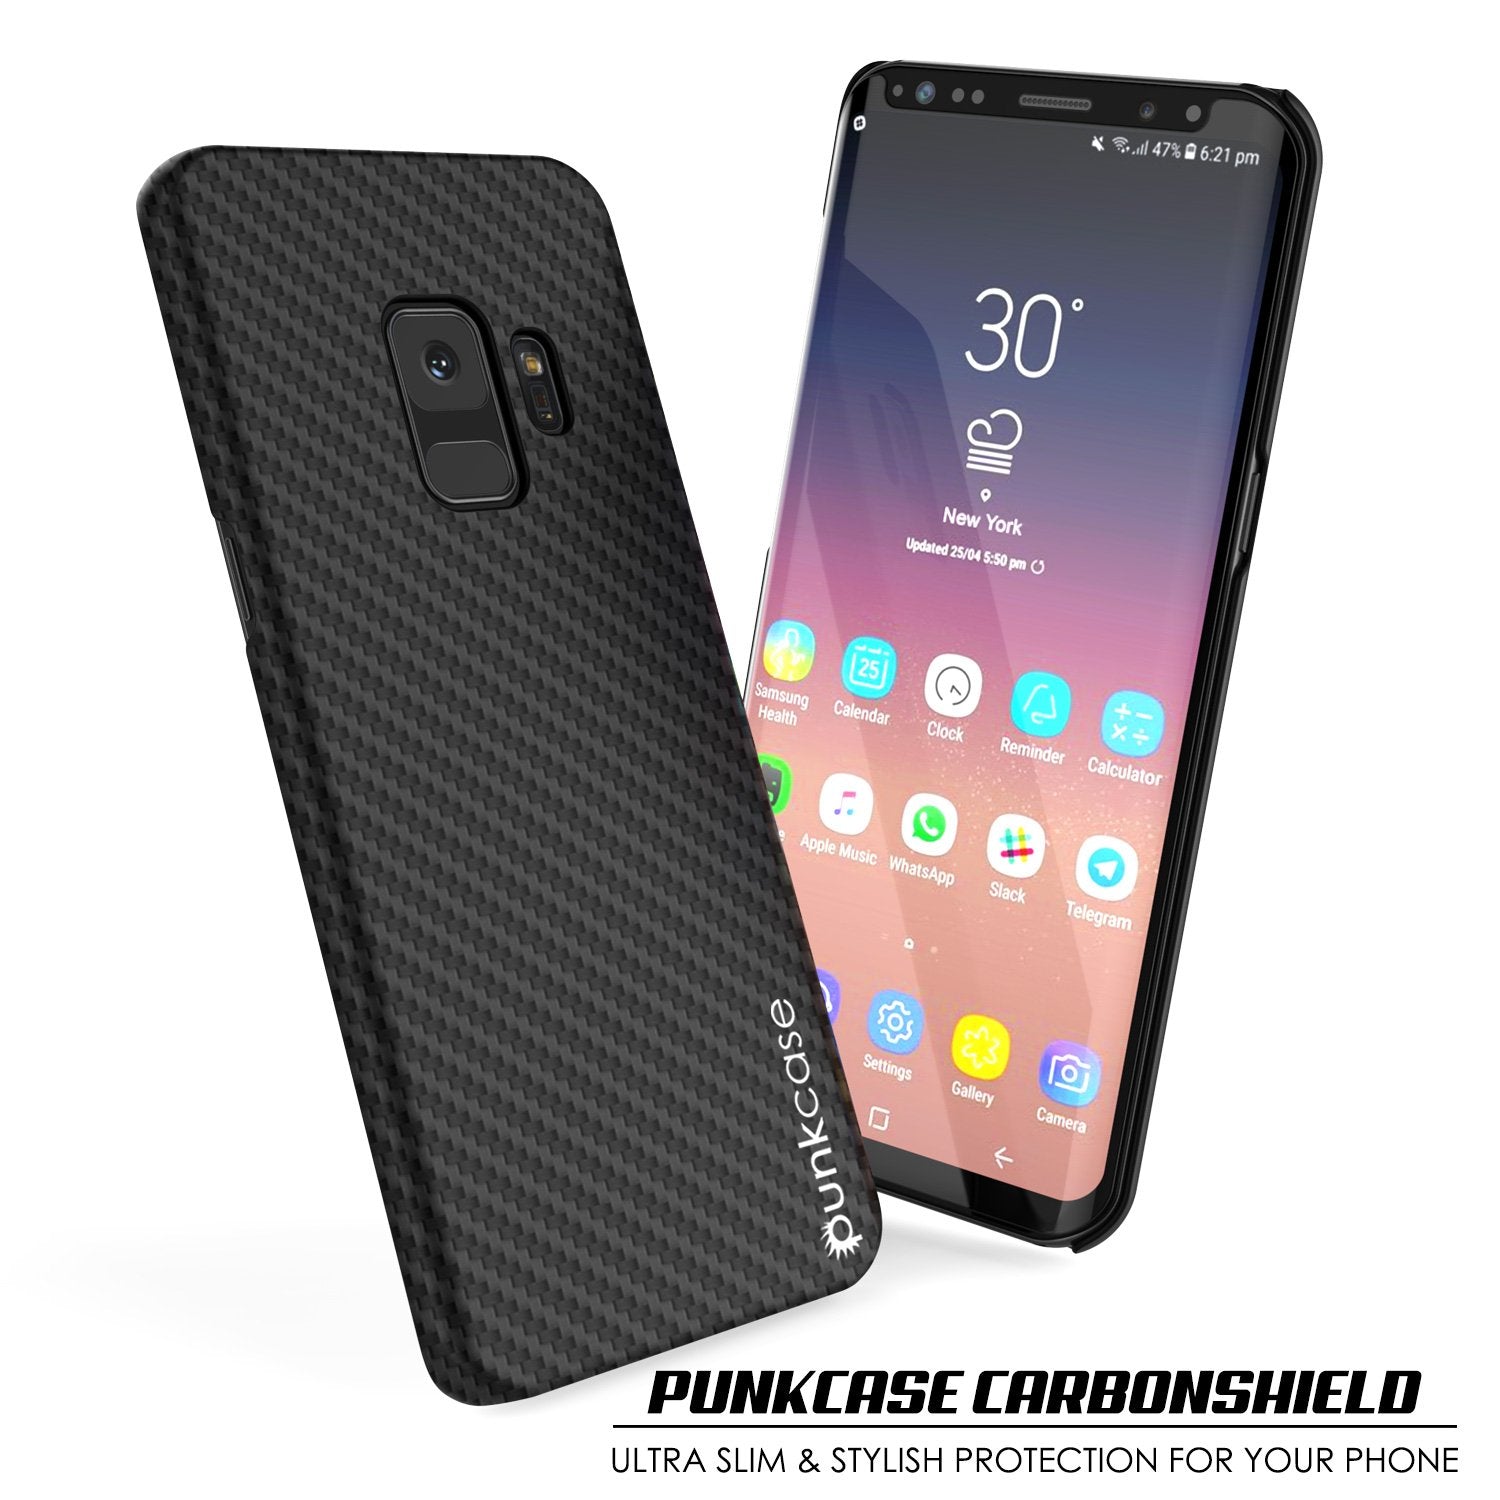 Galaxy S9 Case, Punkcase CarbonShield, Heavy Duty & Ultra Thin 2 Piece Dual Layer PU Leather Black Cover